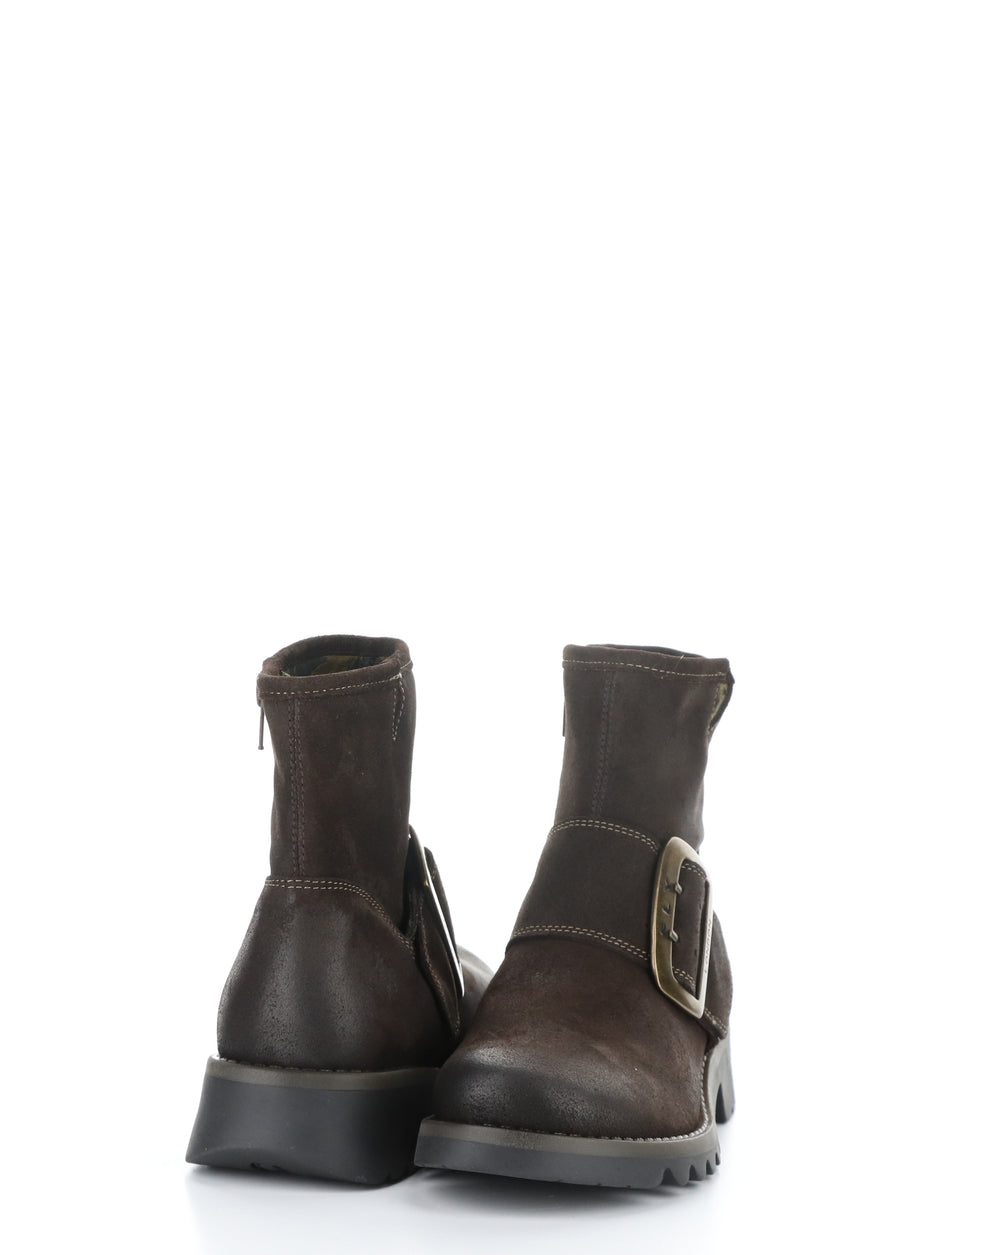 RILY991FLY 007 EXPRESSO Round Toe Boots